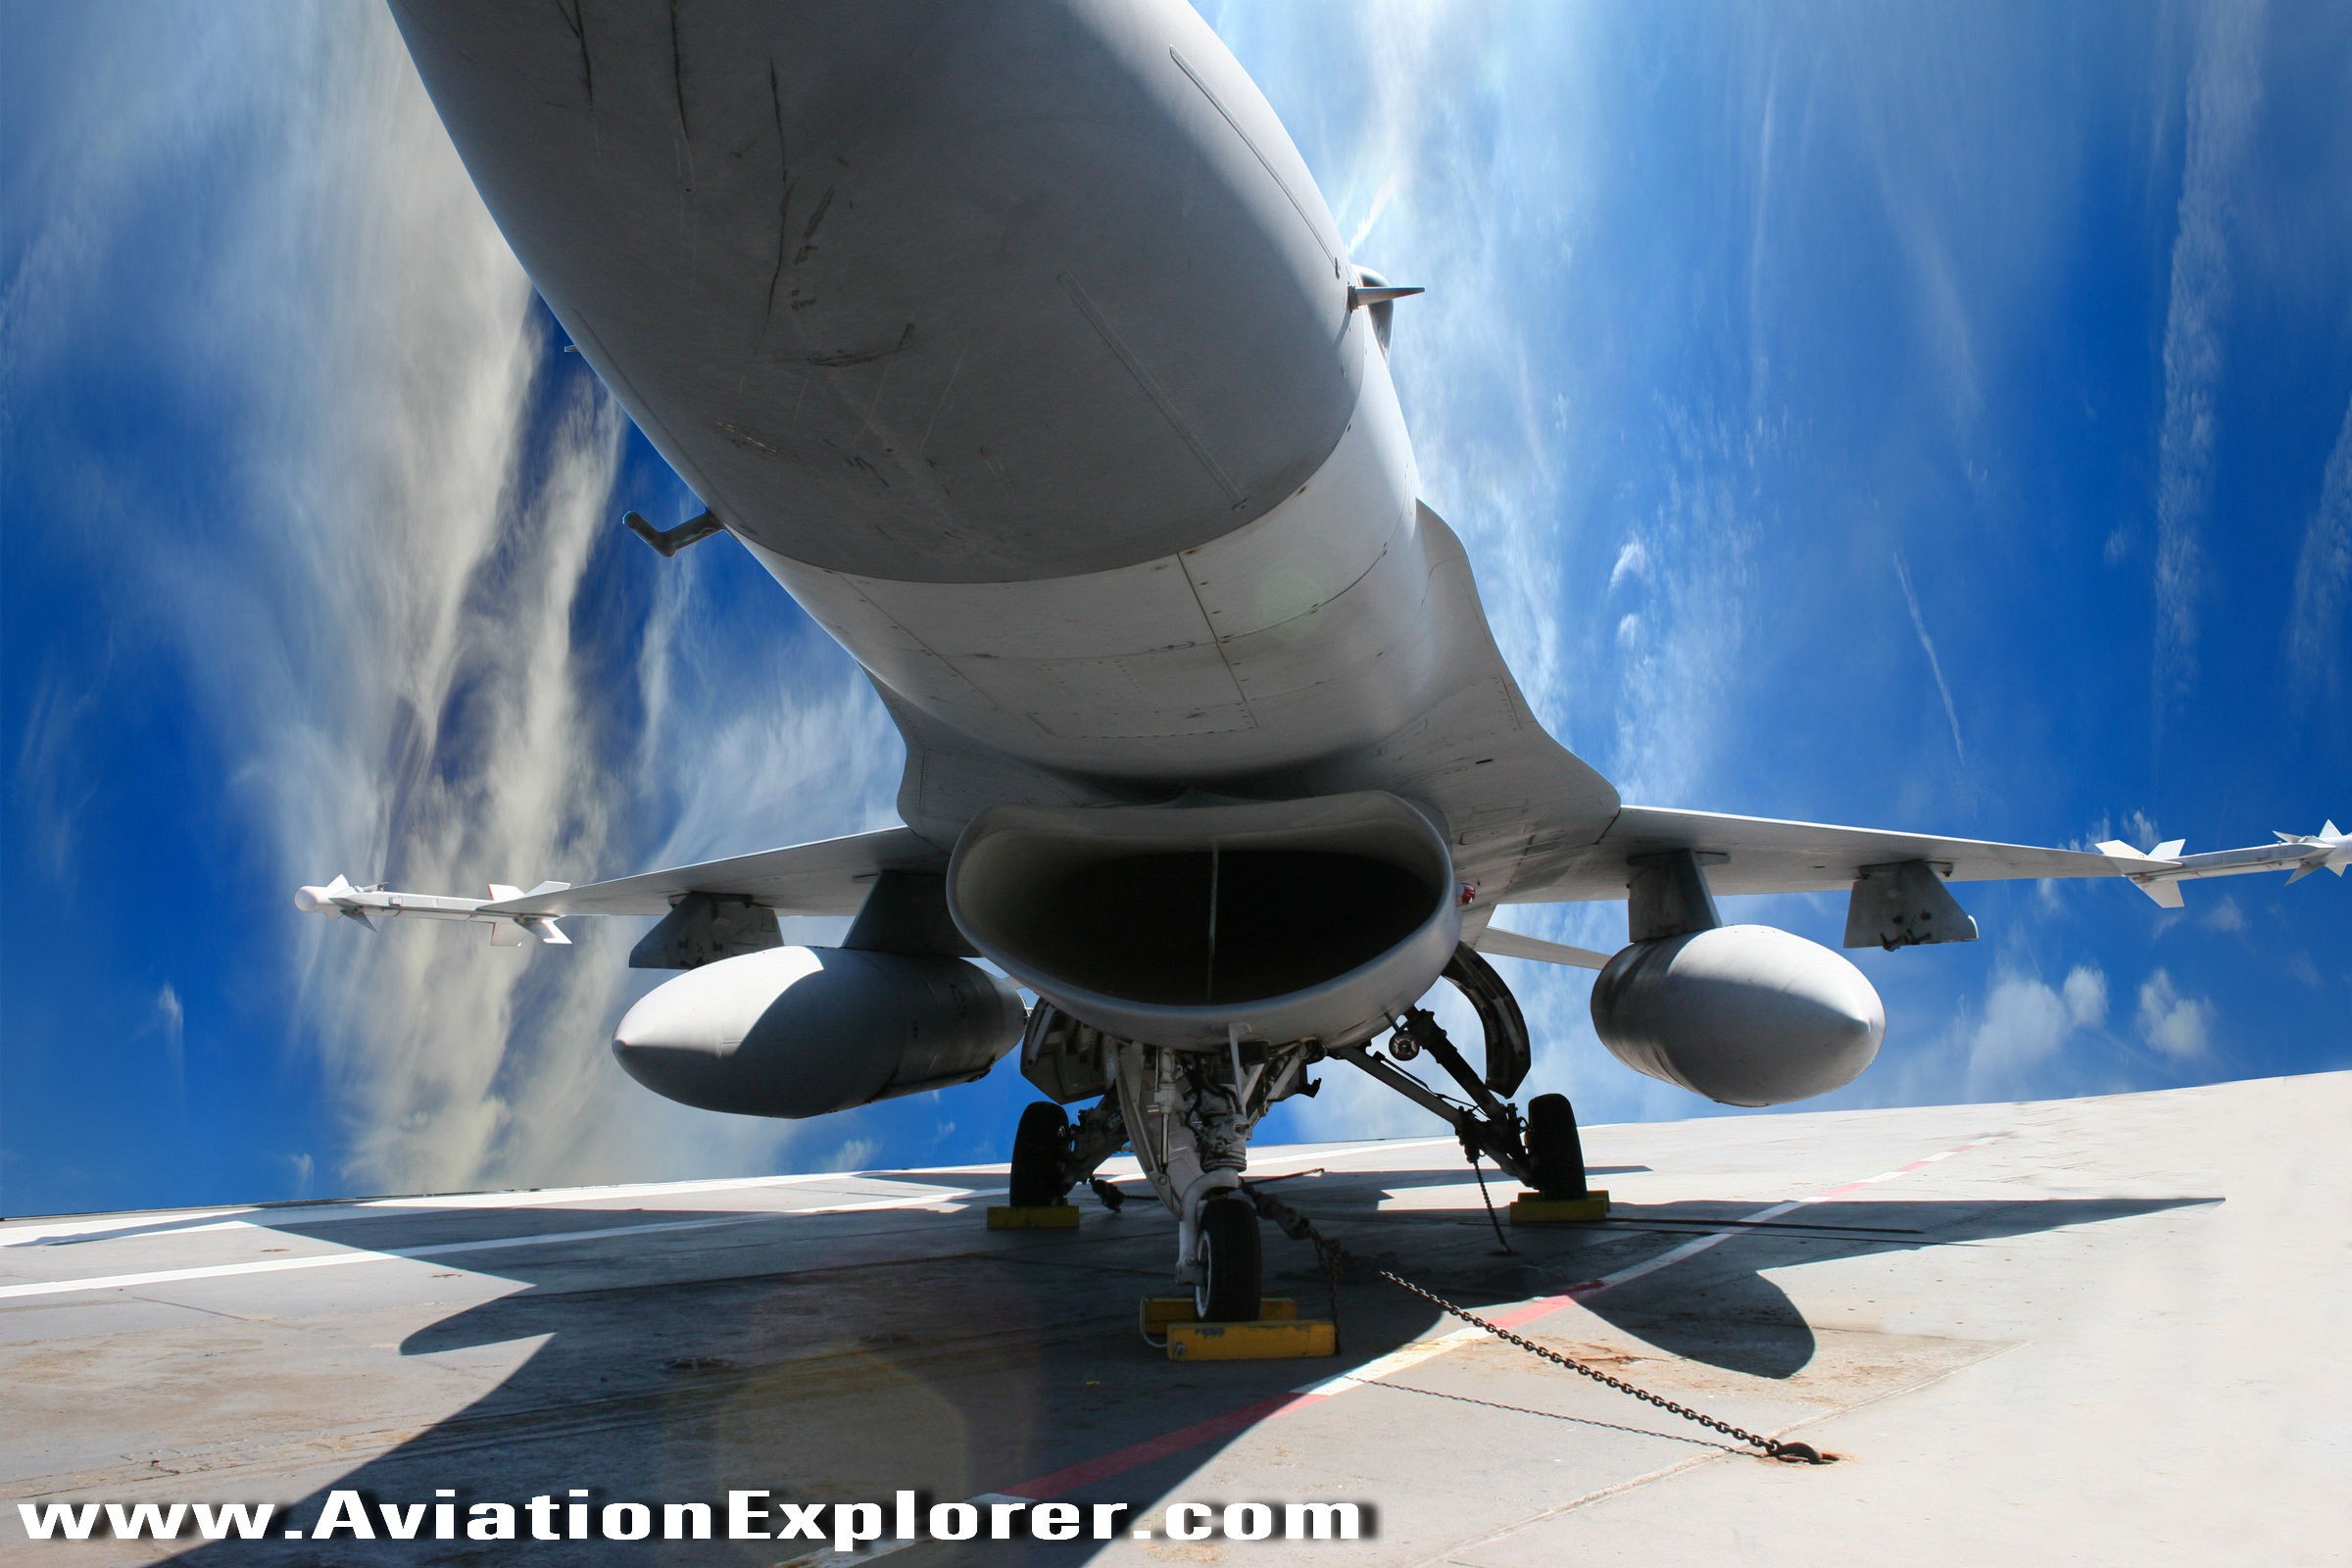 Aviation Explorer Airplane Data Facts References History Of